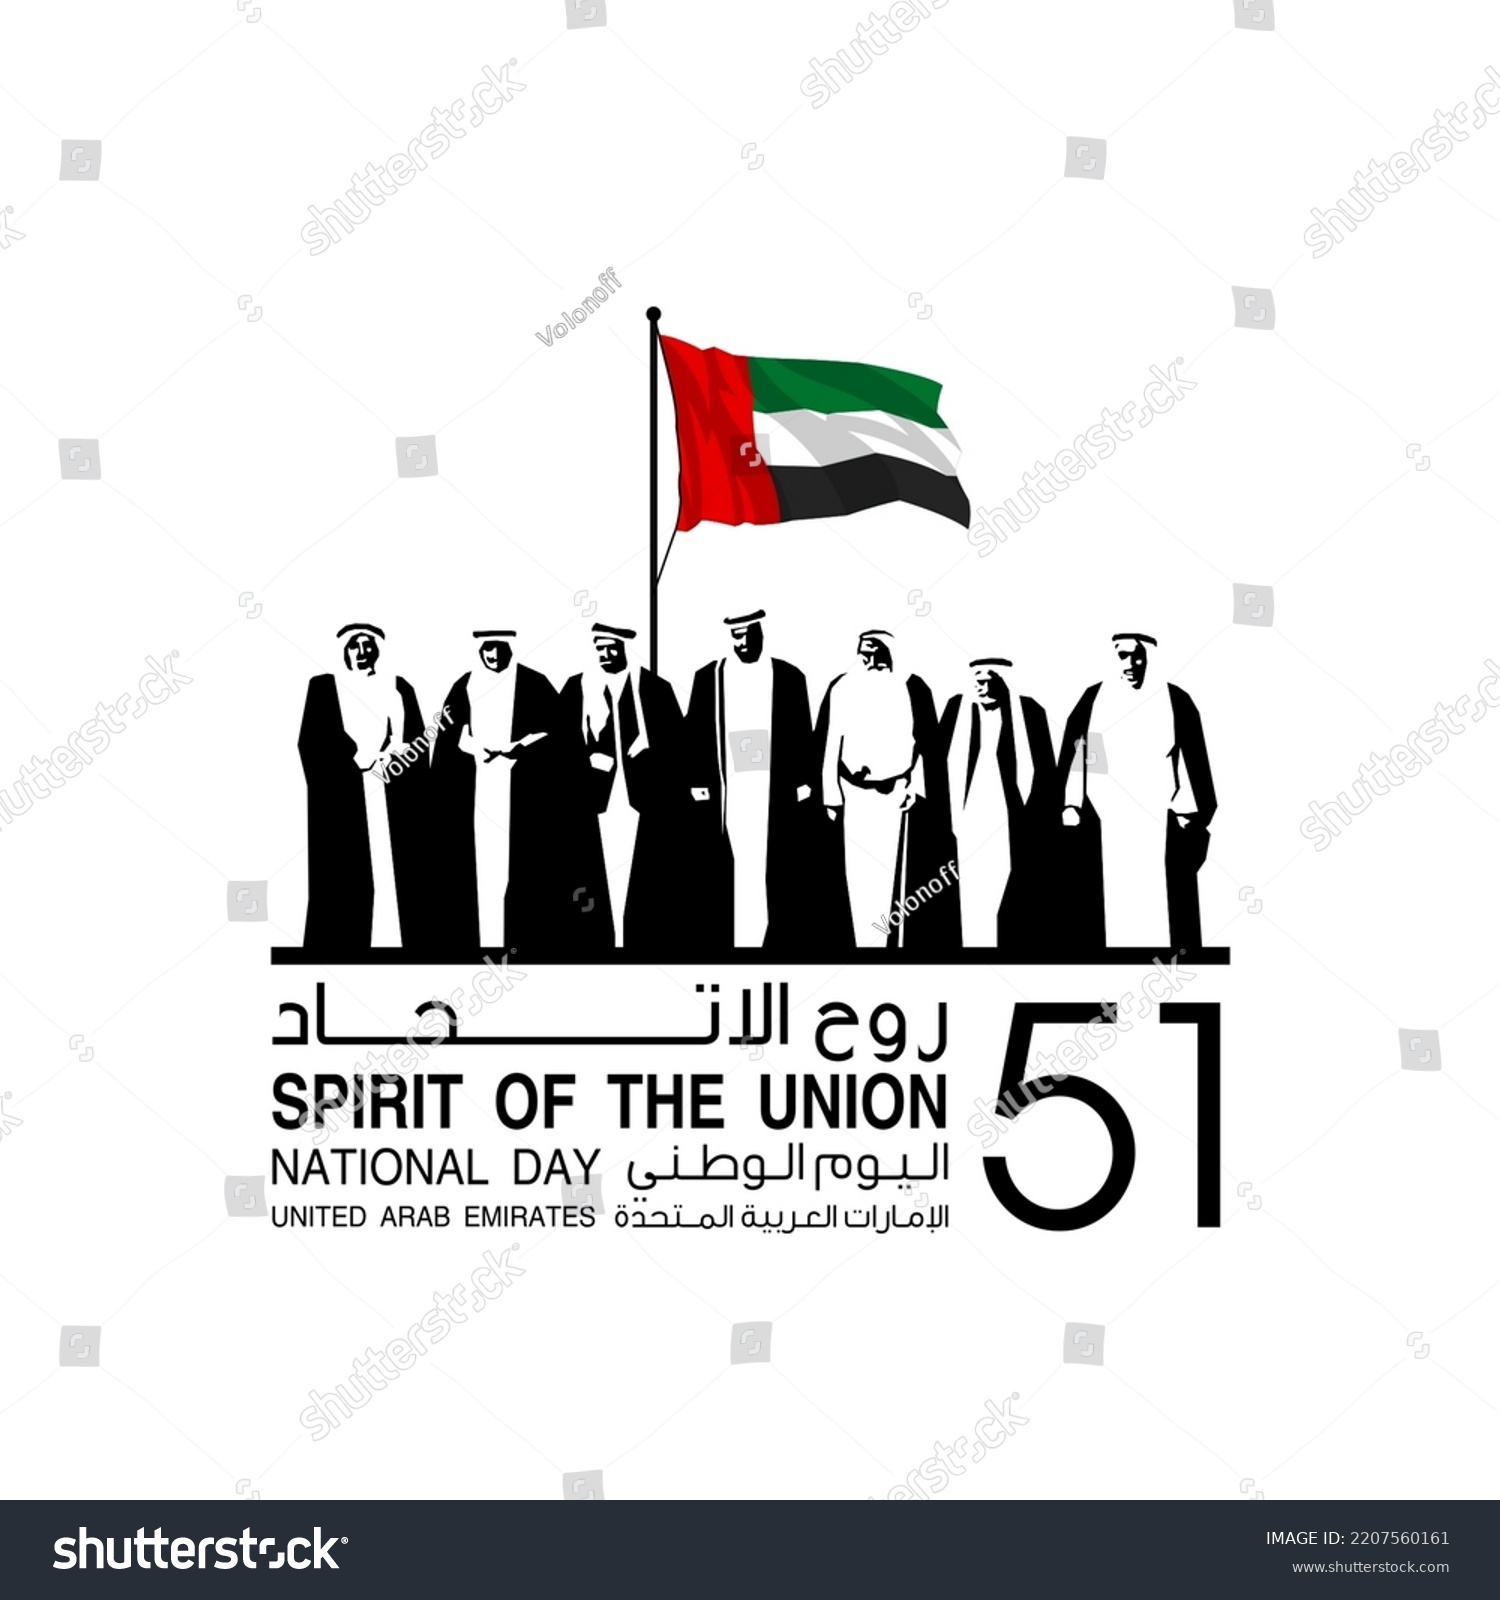 logo UAE national day. tr Arabic: Spirit of the union United Arab Emirates National day. Banner with silhouette UAE arab sheikh. Illustration 51. Card Emirates honor 51th anniversary 2 December 2022 #2207560161